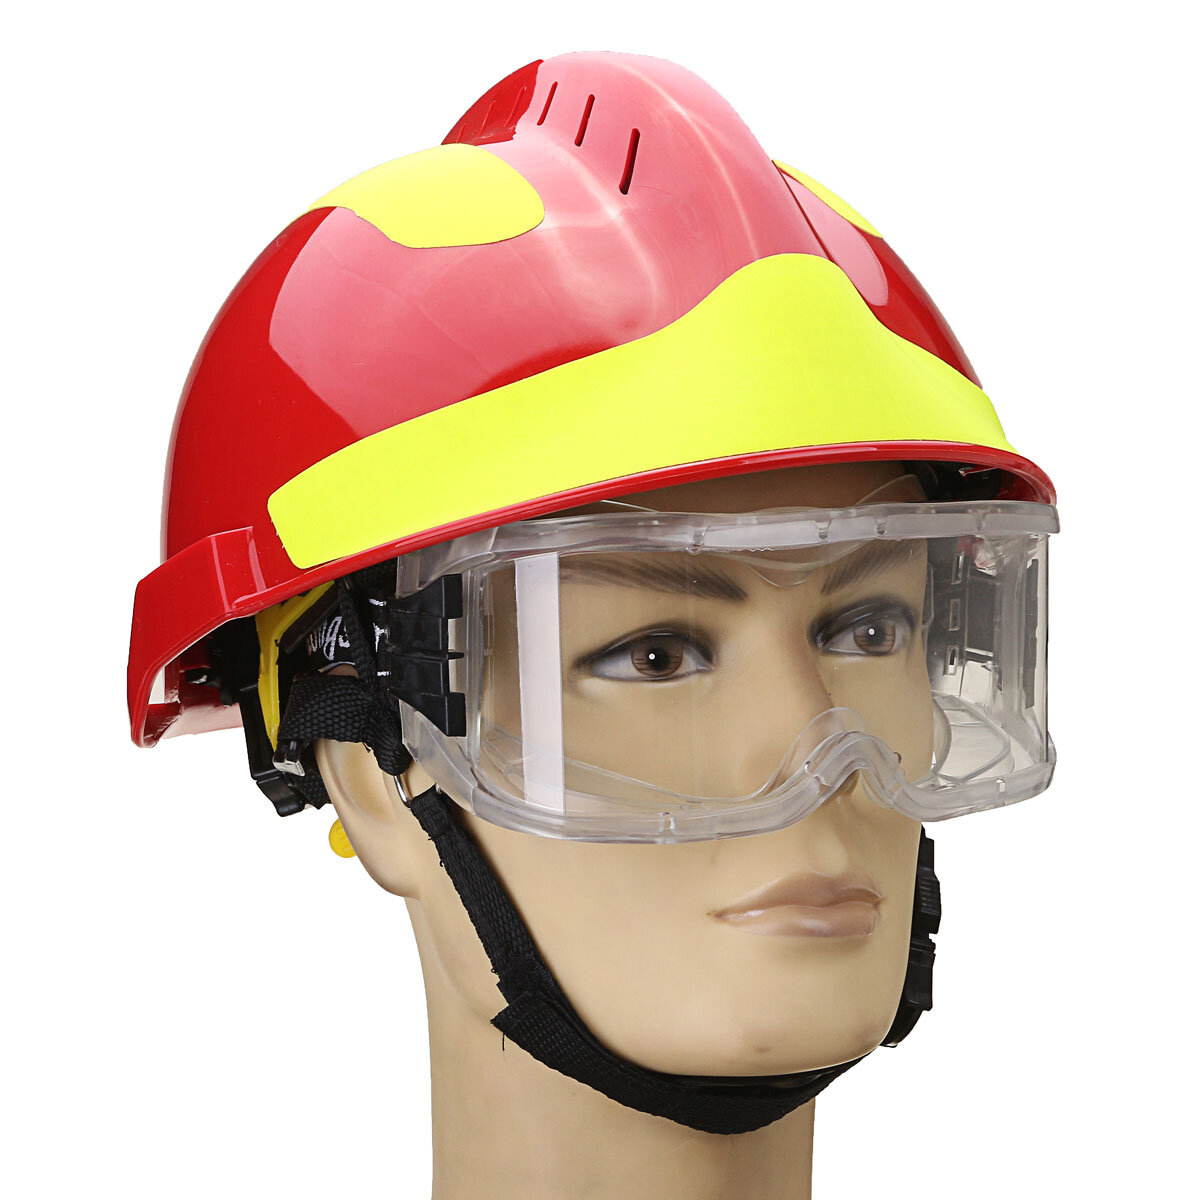 

NEW Safurance Rescue Helmet Fire Fighter Protective Glasses Safety Protector Workplace Safety Fire Protection 53CM-63CM